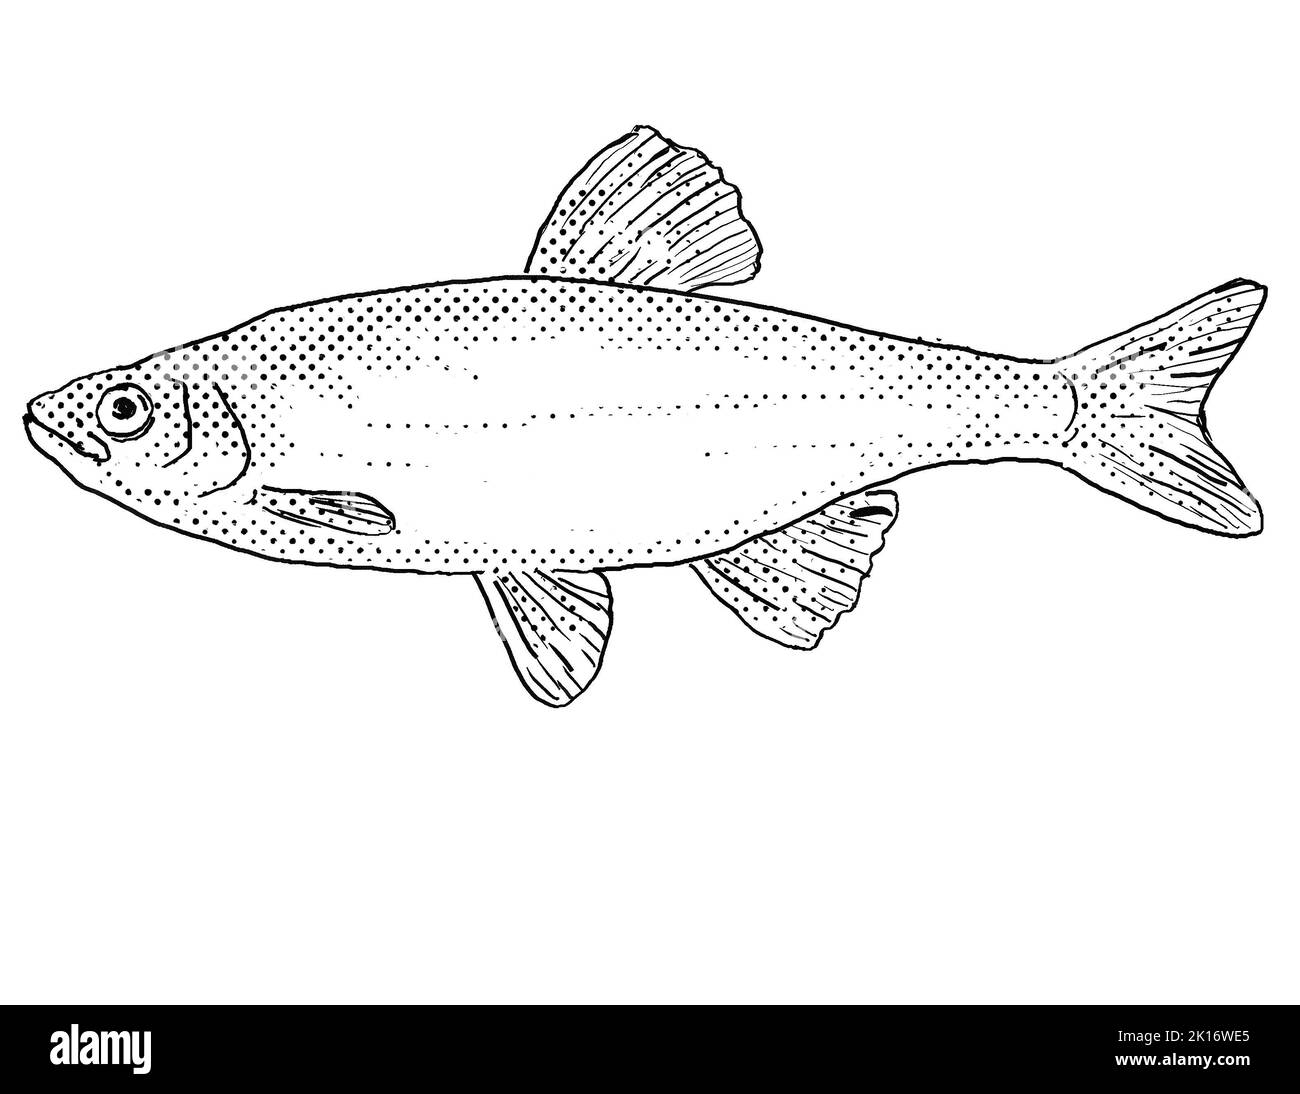 Cartoon style line drawing of a spotfin shiner or Cyprinella spiloptera freshwater fish endemic to North America with halftone dots shading on isolate Stock Photo